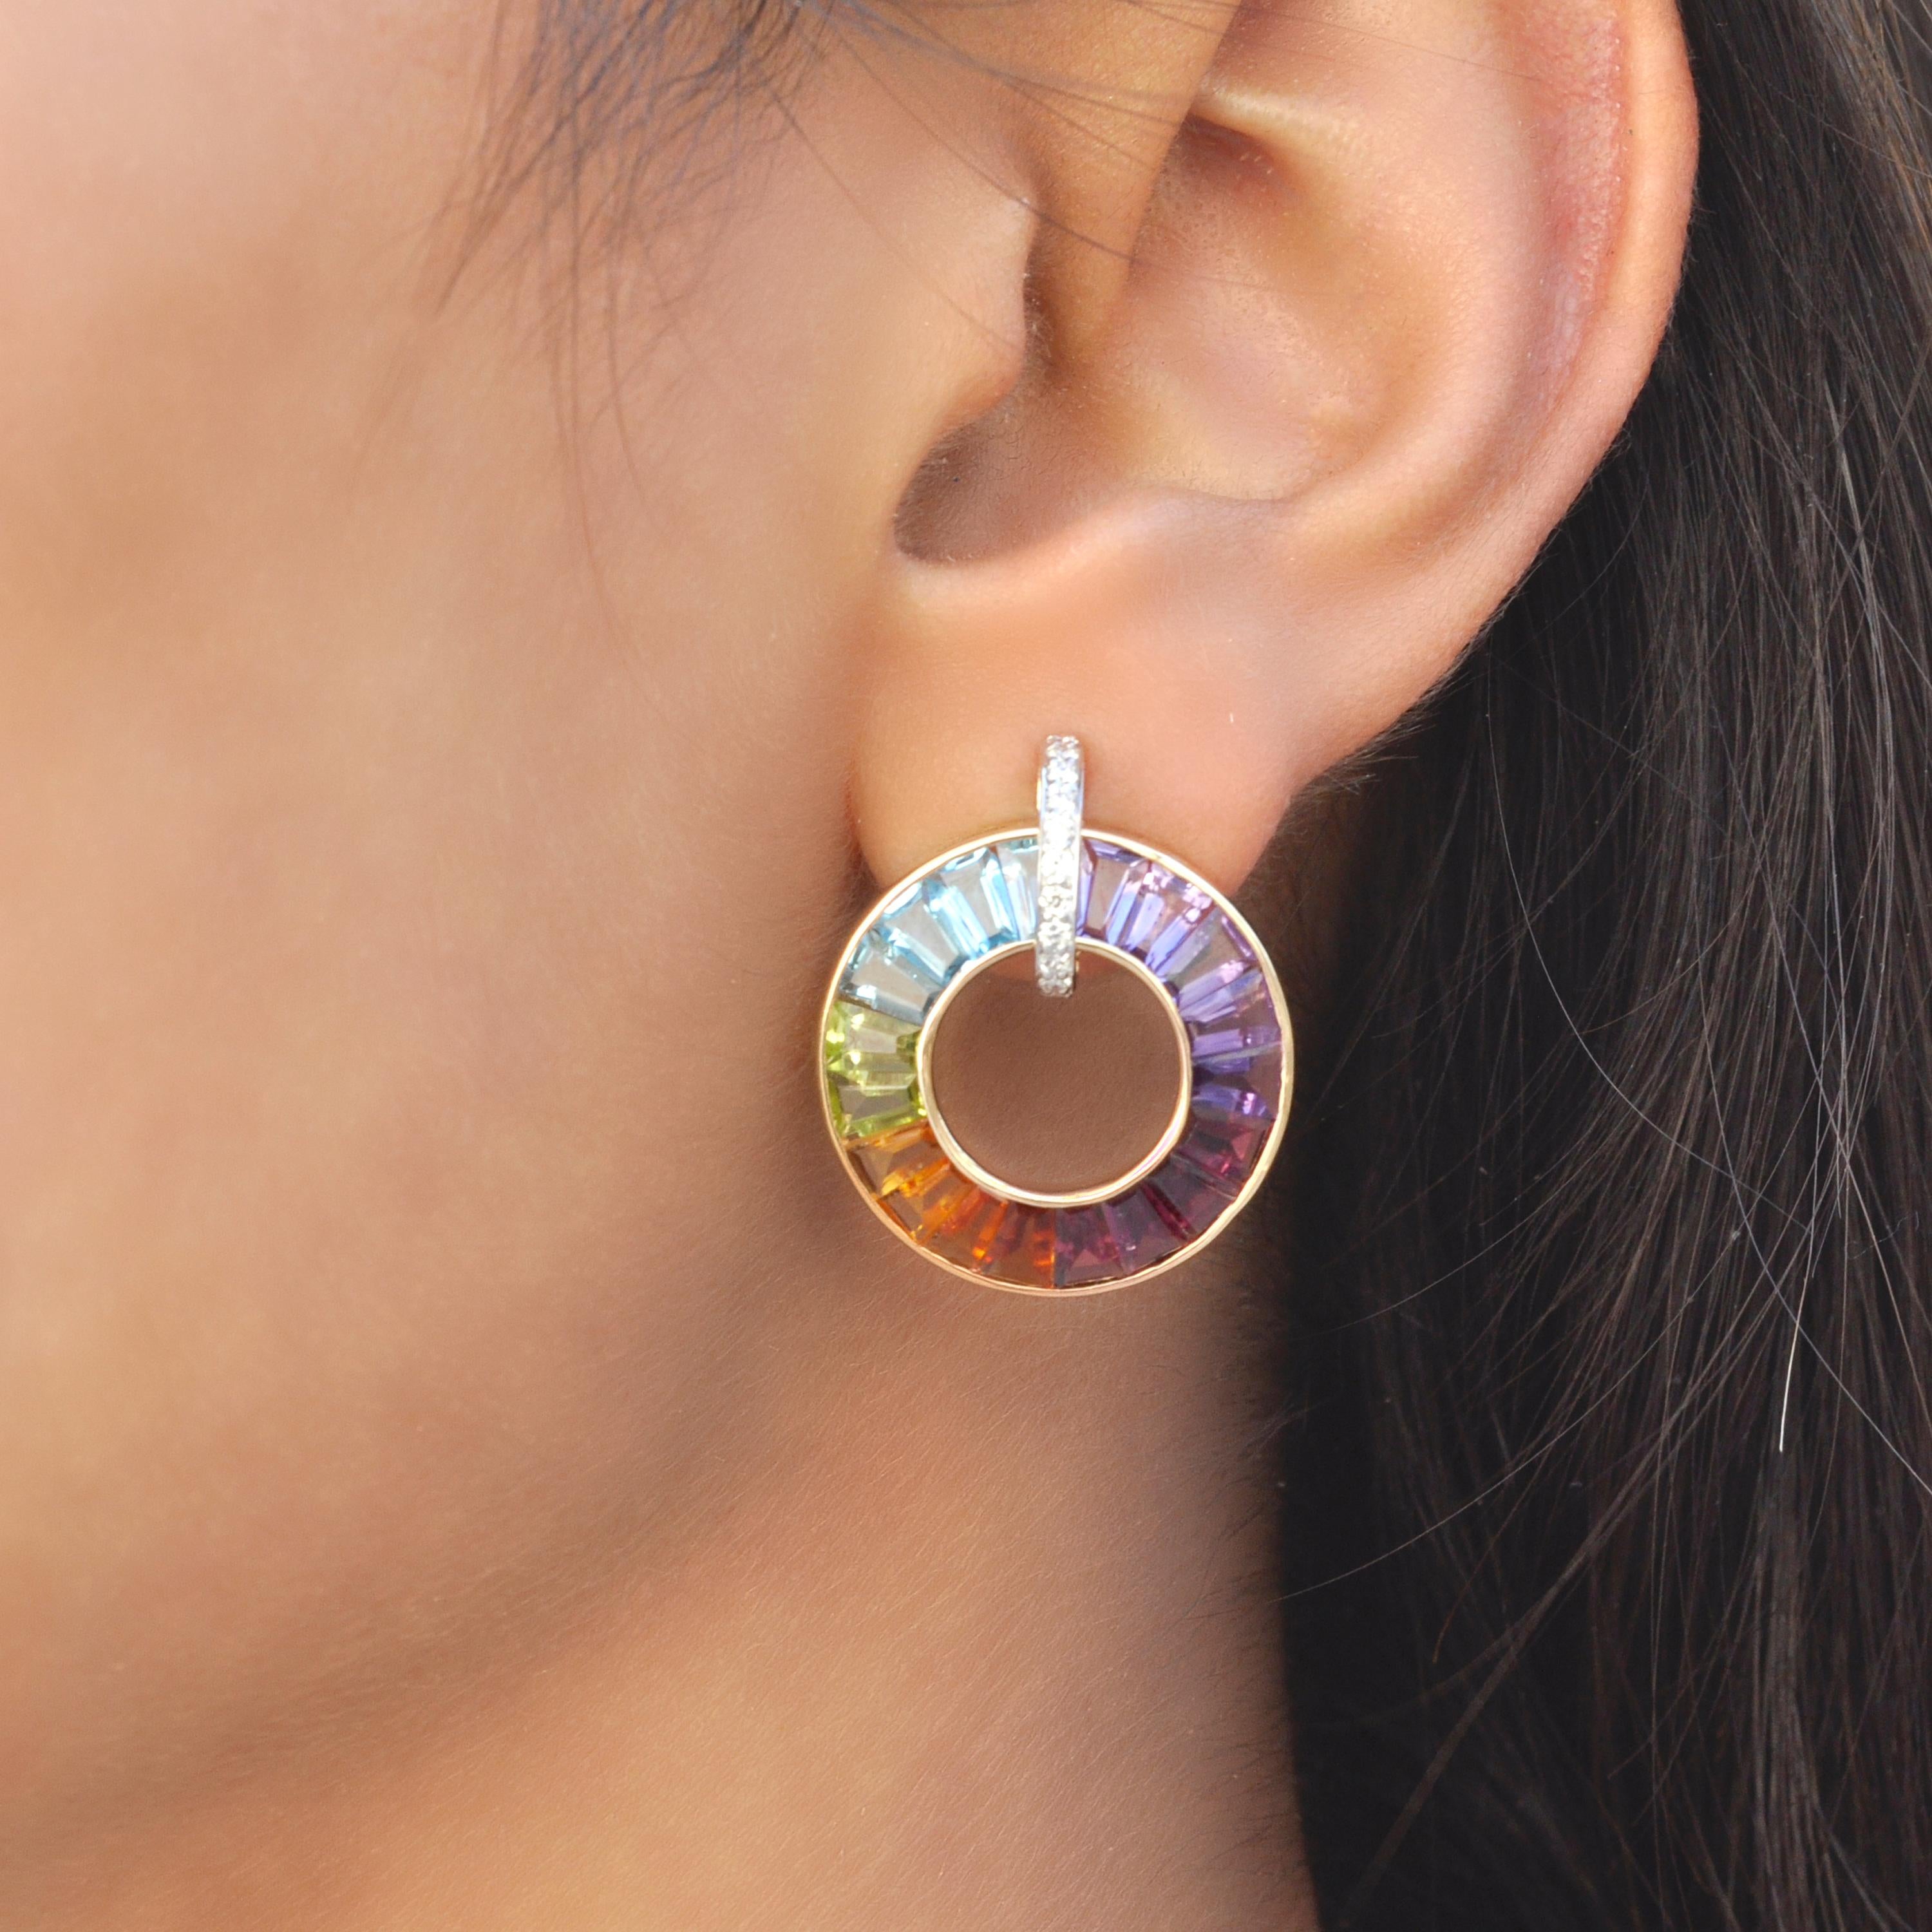 These are our 18k gold rainbow gemstones diamond circle earrings, a celebration of vibrant hues and undeniable glamour. Crafted in luxurious 18-karat gold, these earrings feature a captivating circle adorned with a spectrum of rainbow gemstones: